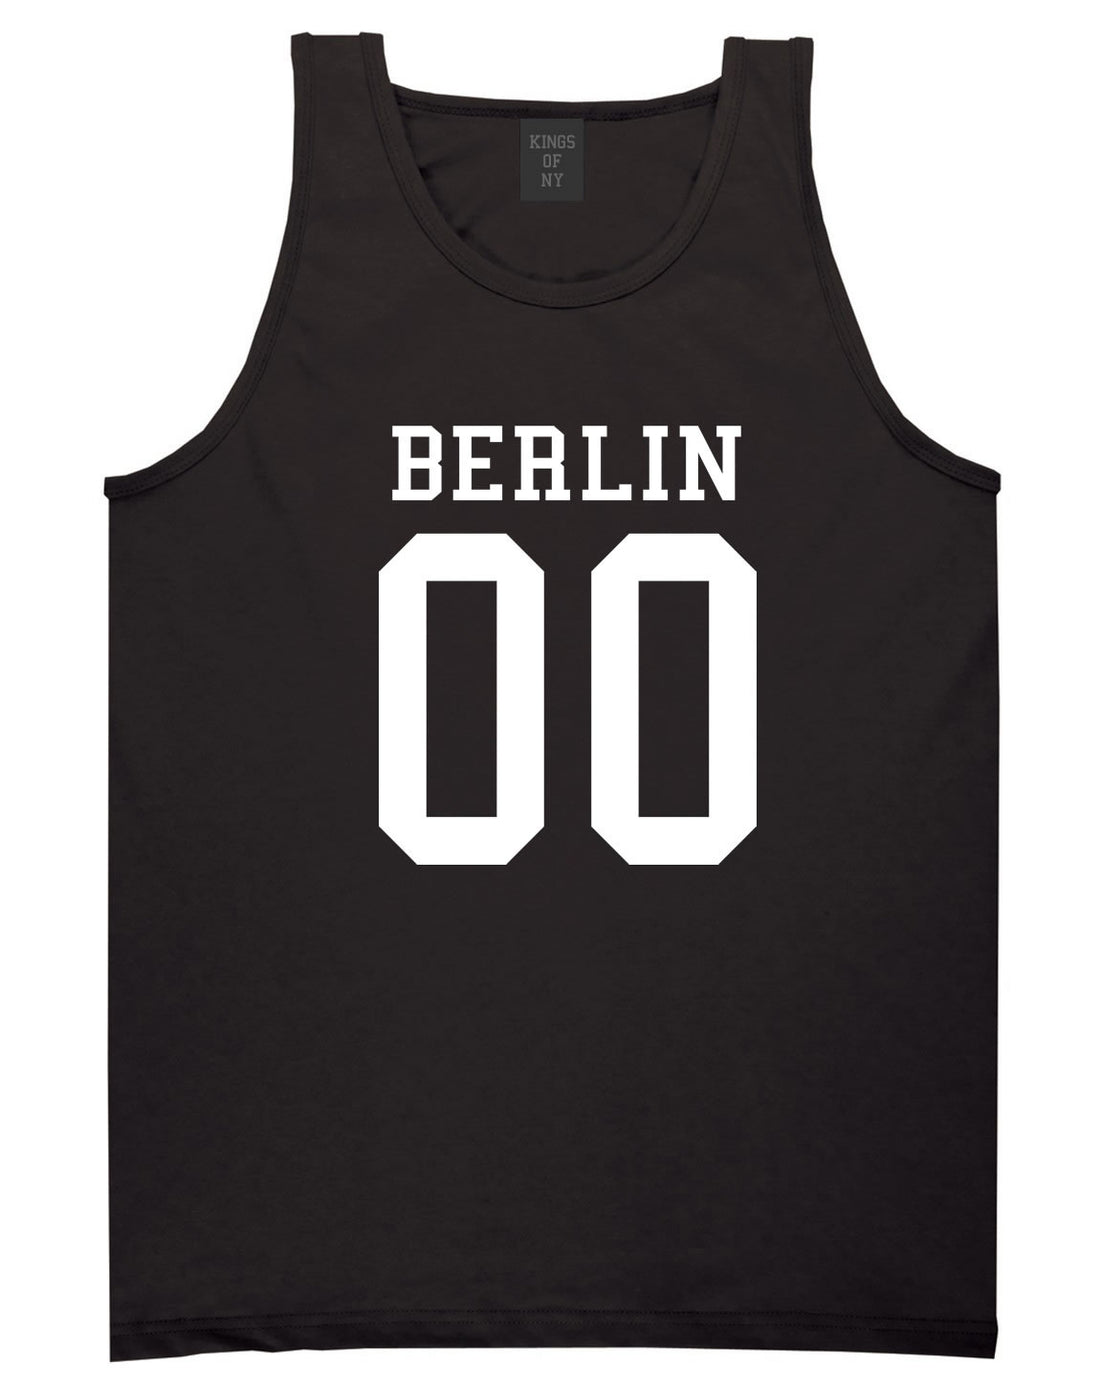 Berlin Team Jersey Germany Country Tank Top in Black By Kings Of NY